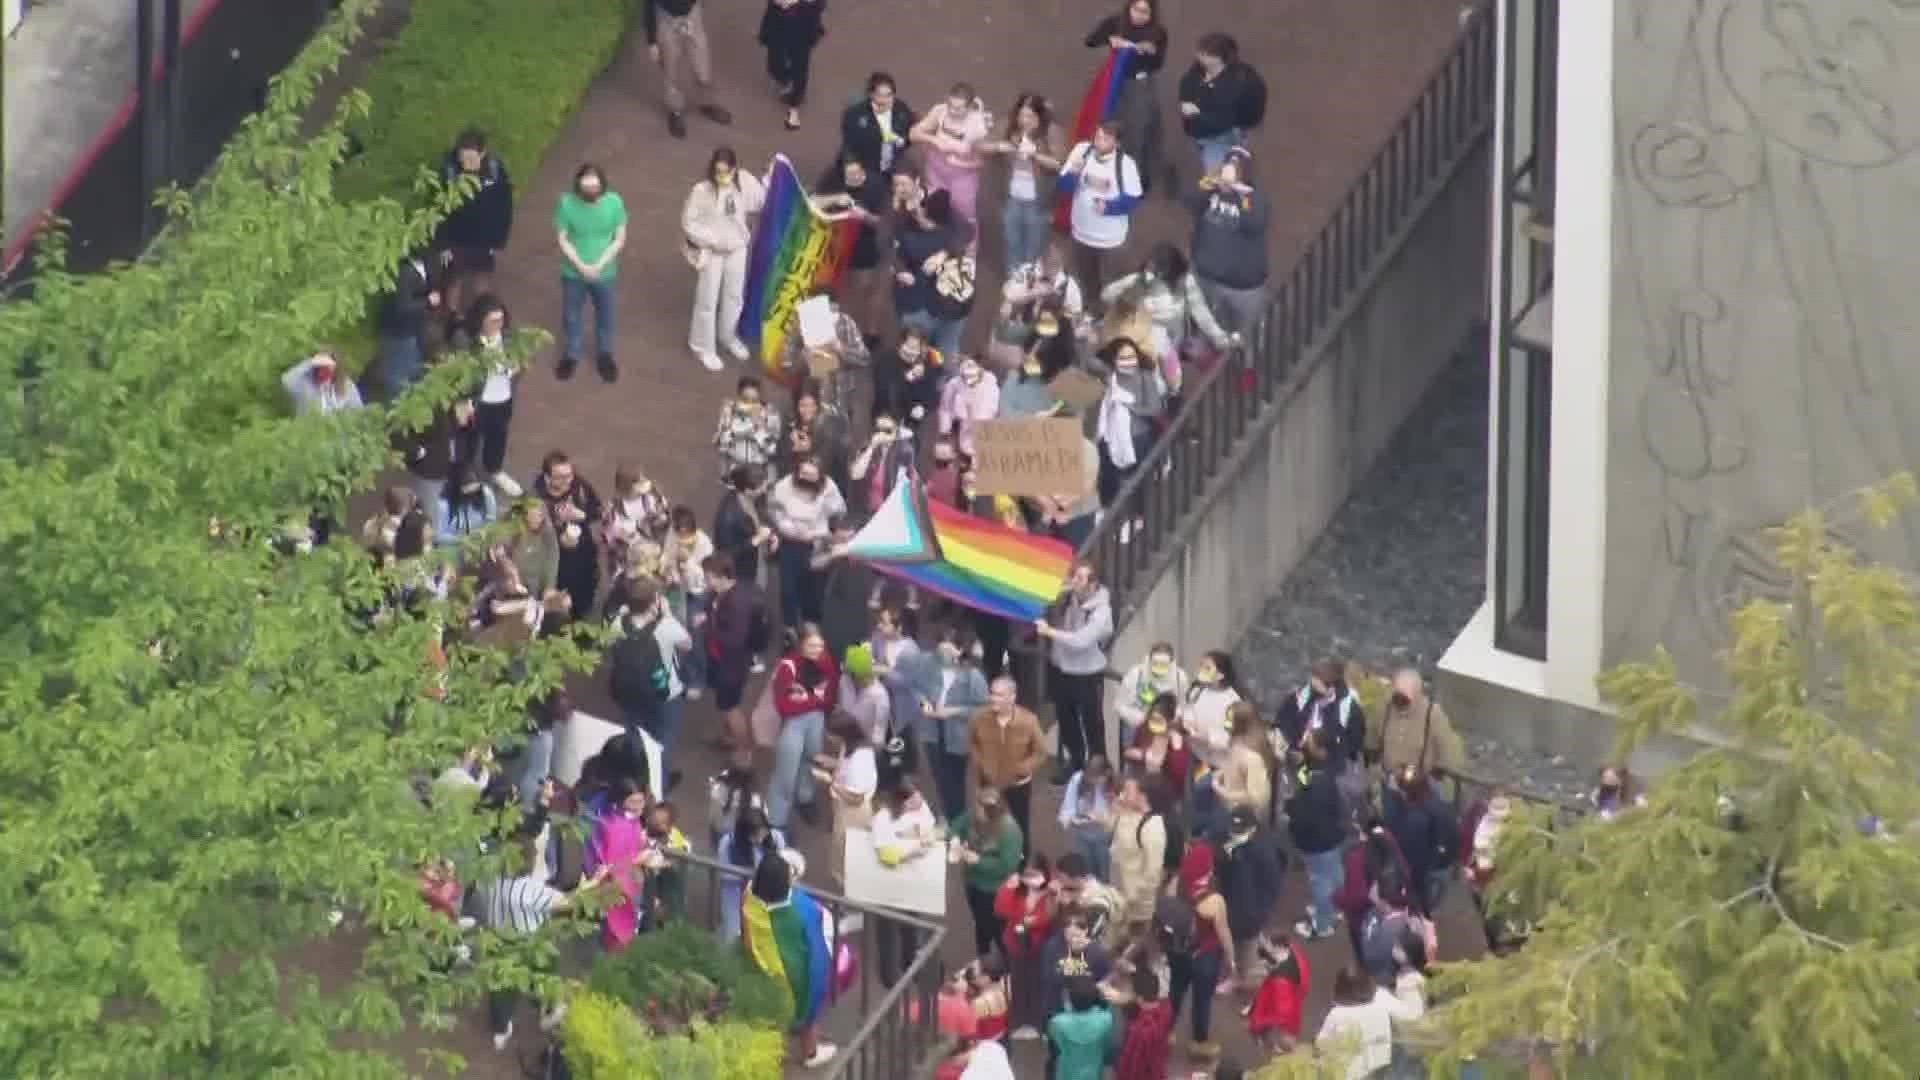 An attorney for SPU says it's a matter of religious liberty. Organizers protesting the policy say it discriminates on a campus that is typically LBGTQ+ affirming.